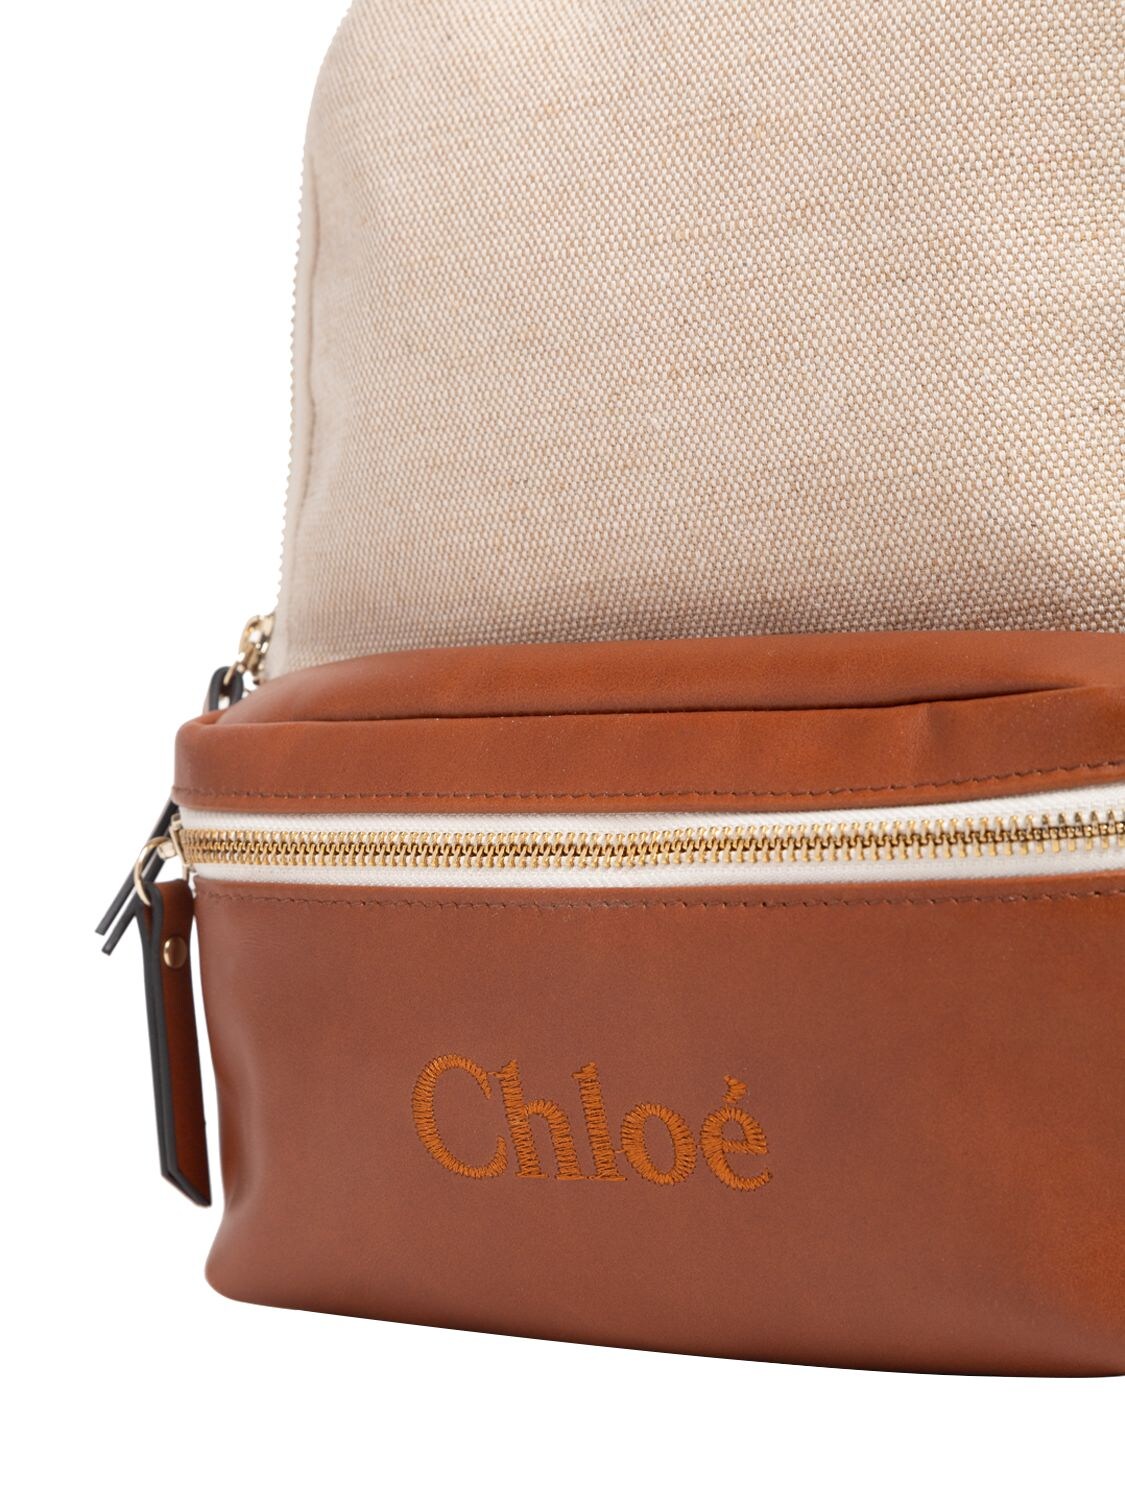 Chloé Girl's Logo Cotton & Leather Backpack - Stone One-Size